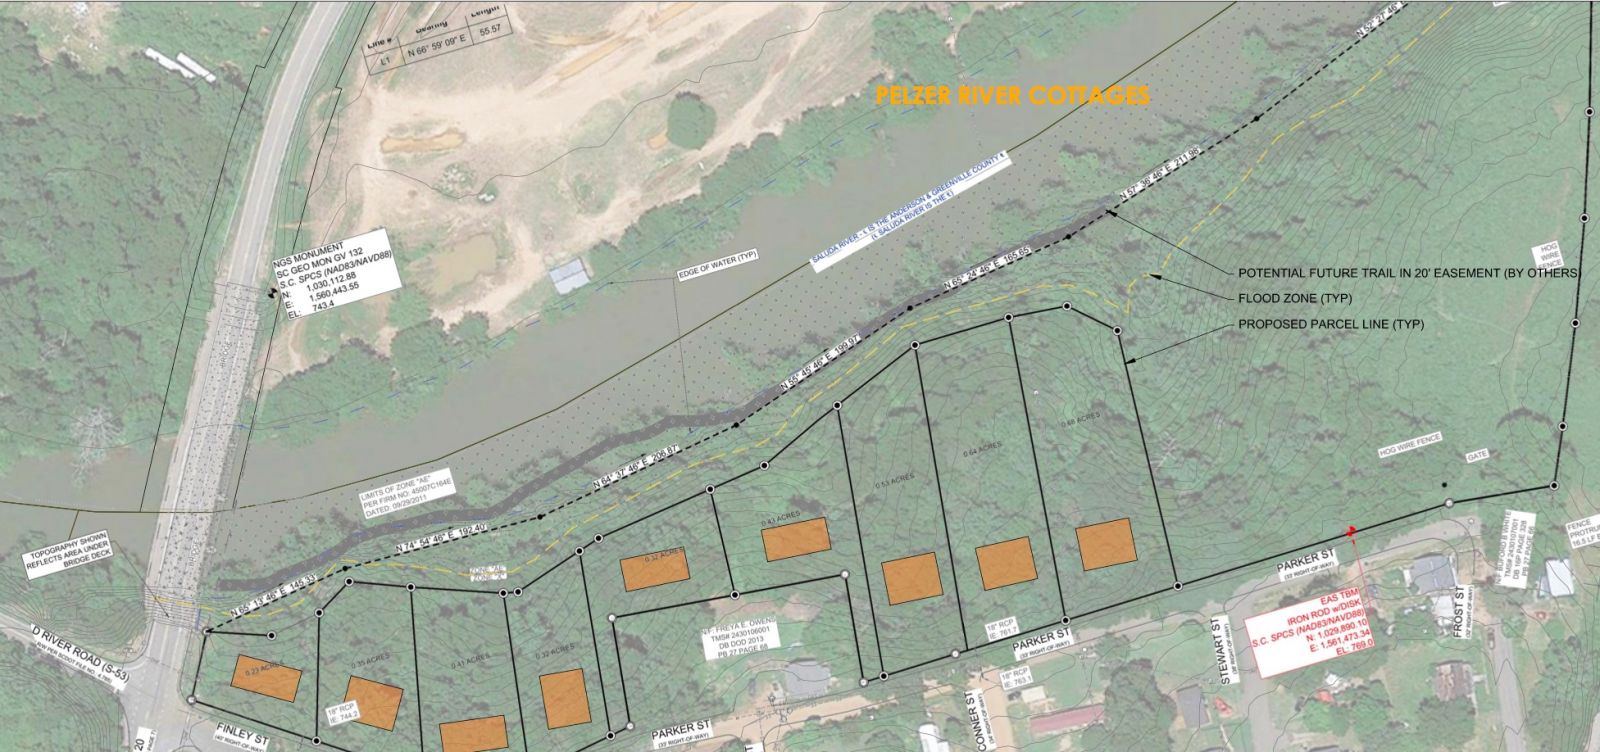 A conceptual site plan from Seamon Whiteside shows the 10-acre Pelzer River Cottage property with an easement along the river for a potential walking trail. (Rendering/Provided)